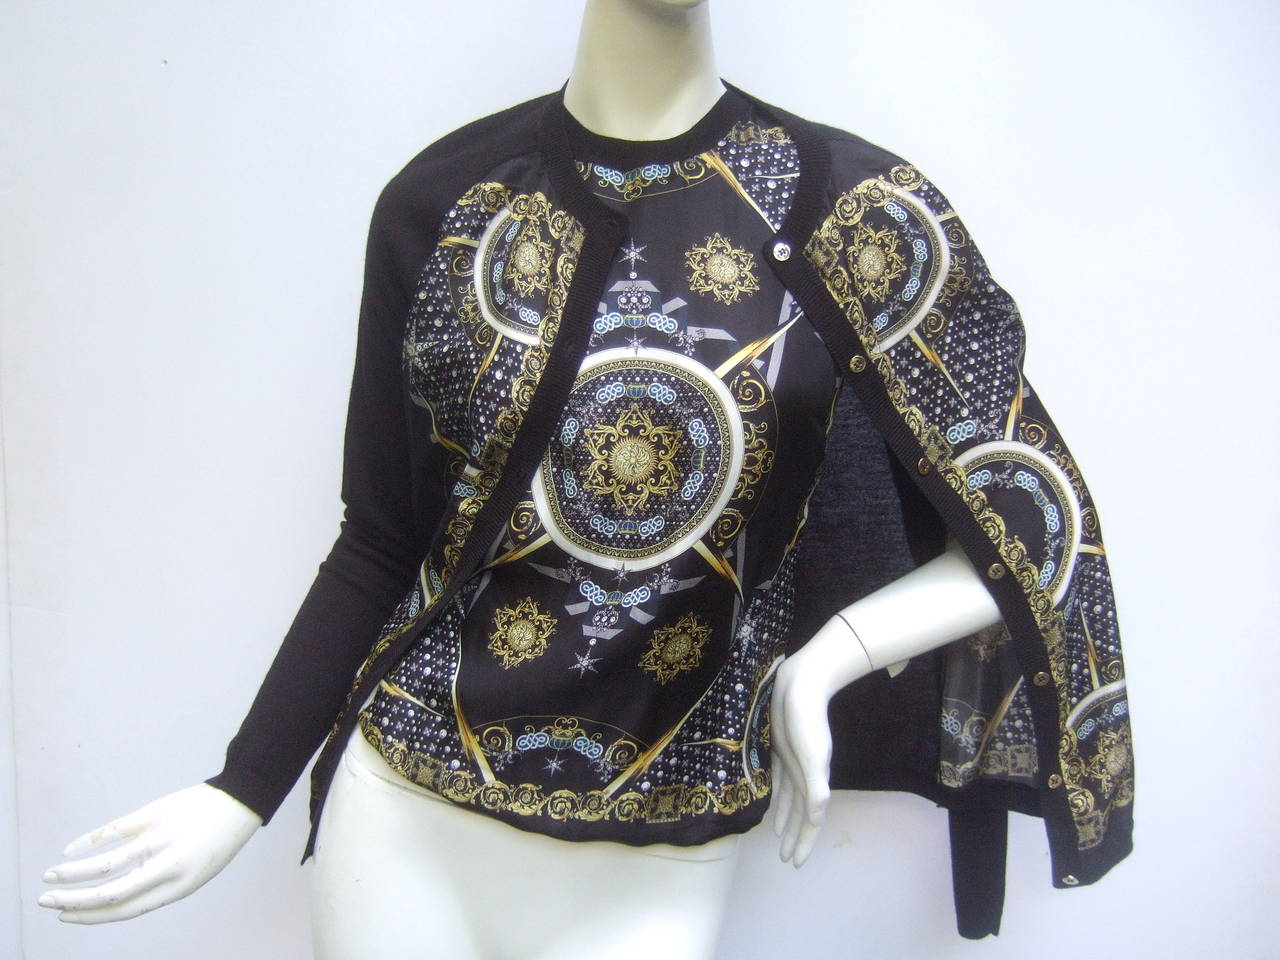 Versace Collection chic silk & wool twinset Size 42 - 40
The stylish cardigan is designed with silk panels
on the front. The cardigan is embellished with small 
gilt metal buttons with medusa silhouettes

The matching shell is illustrated